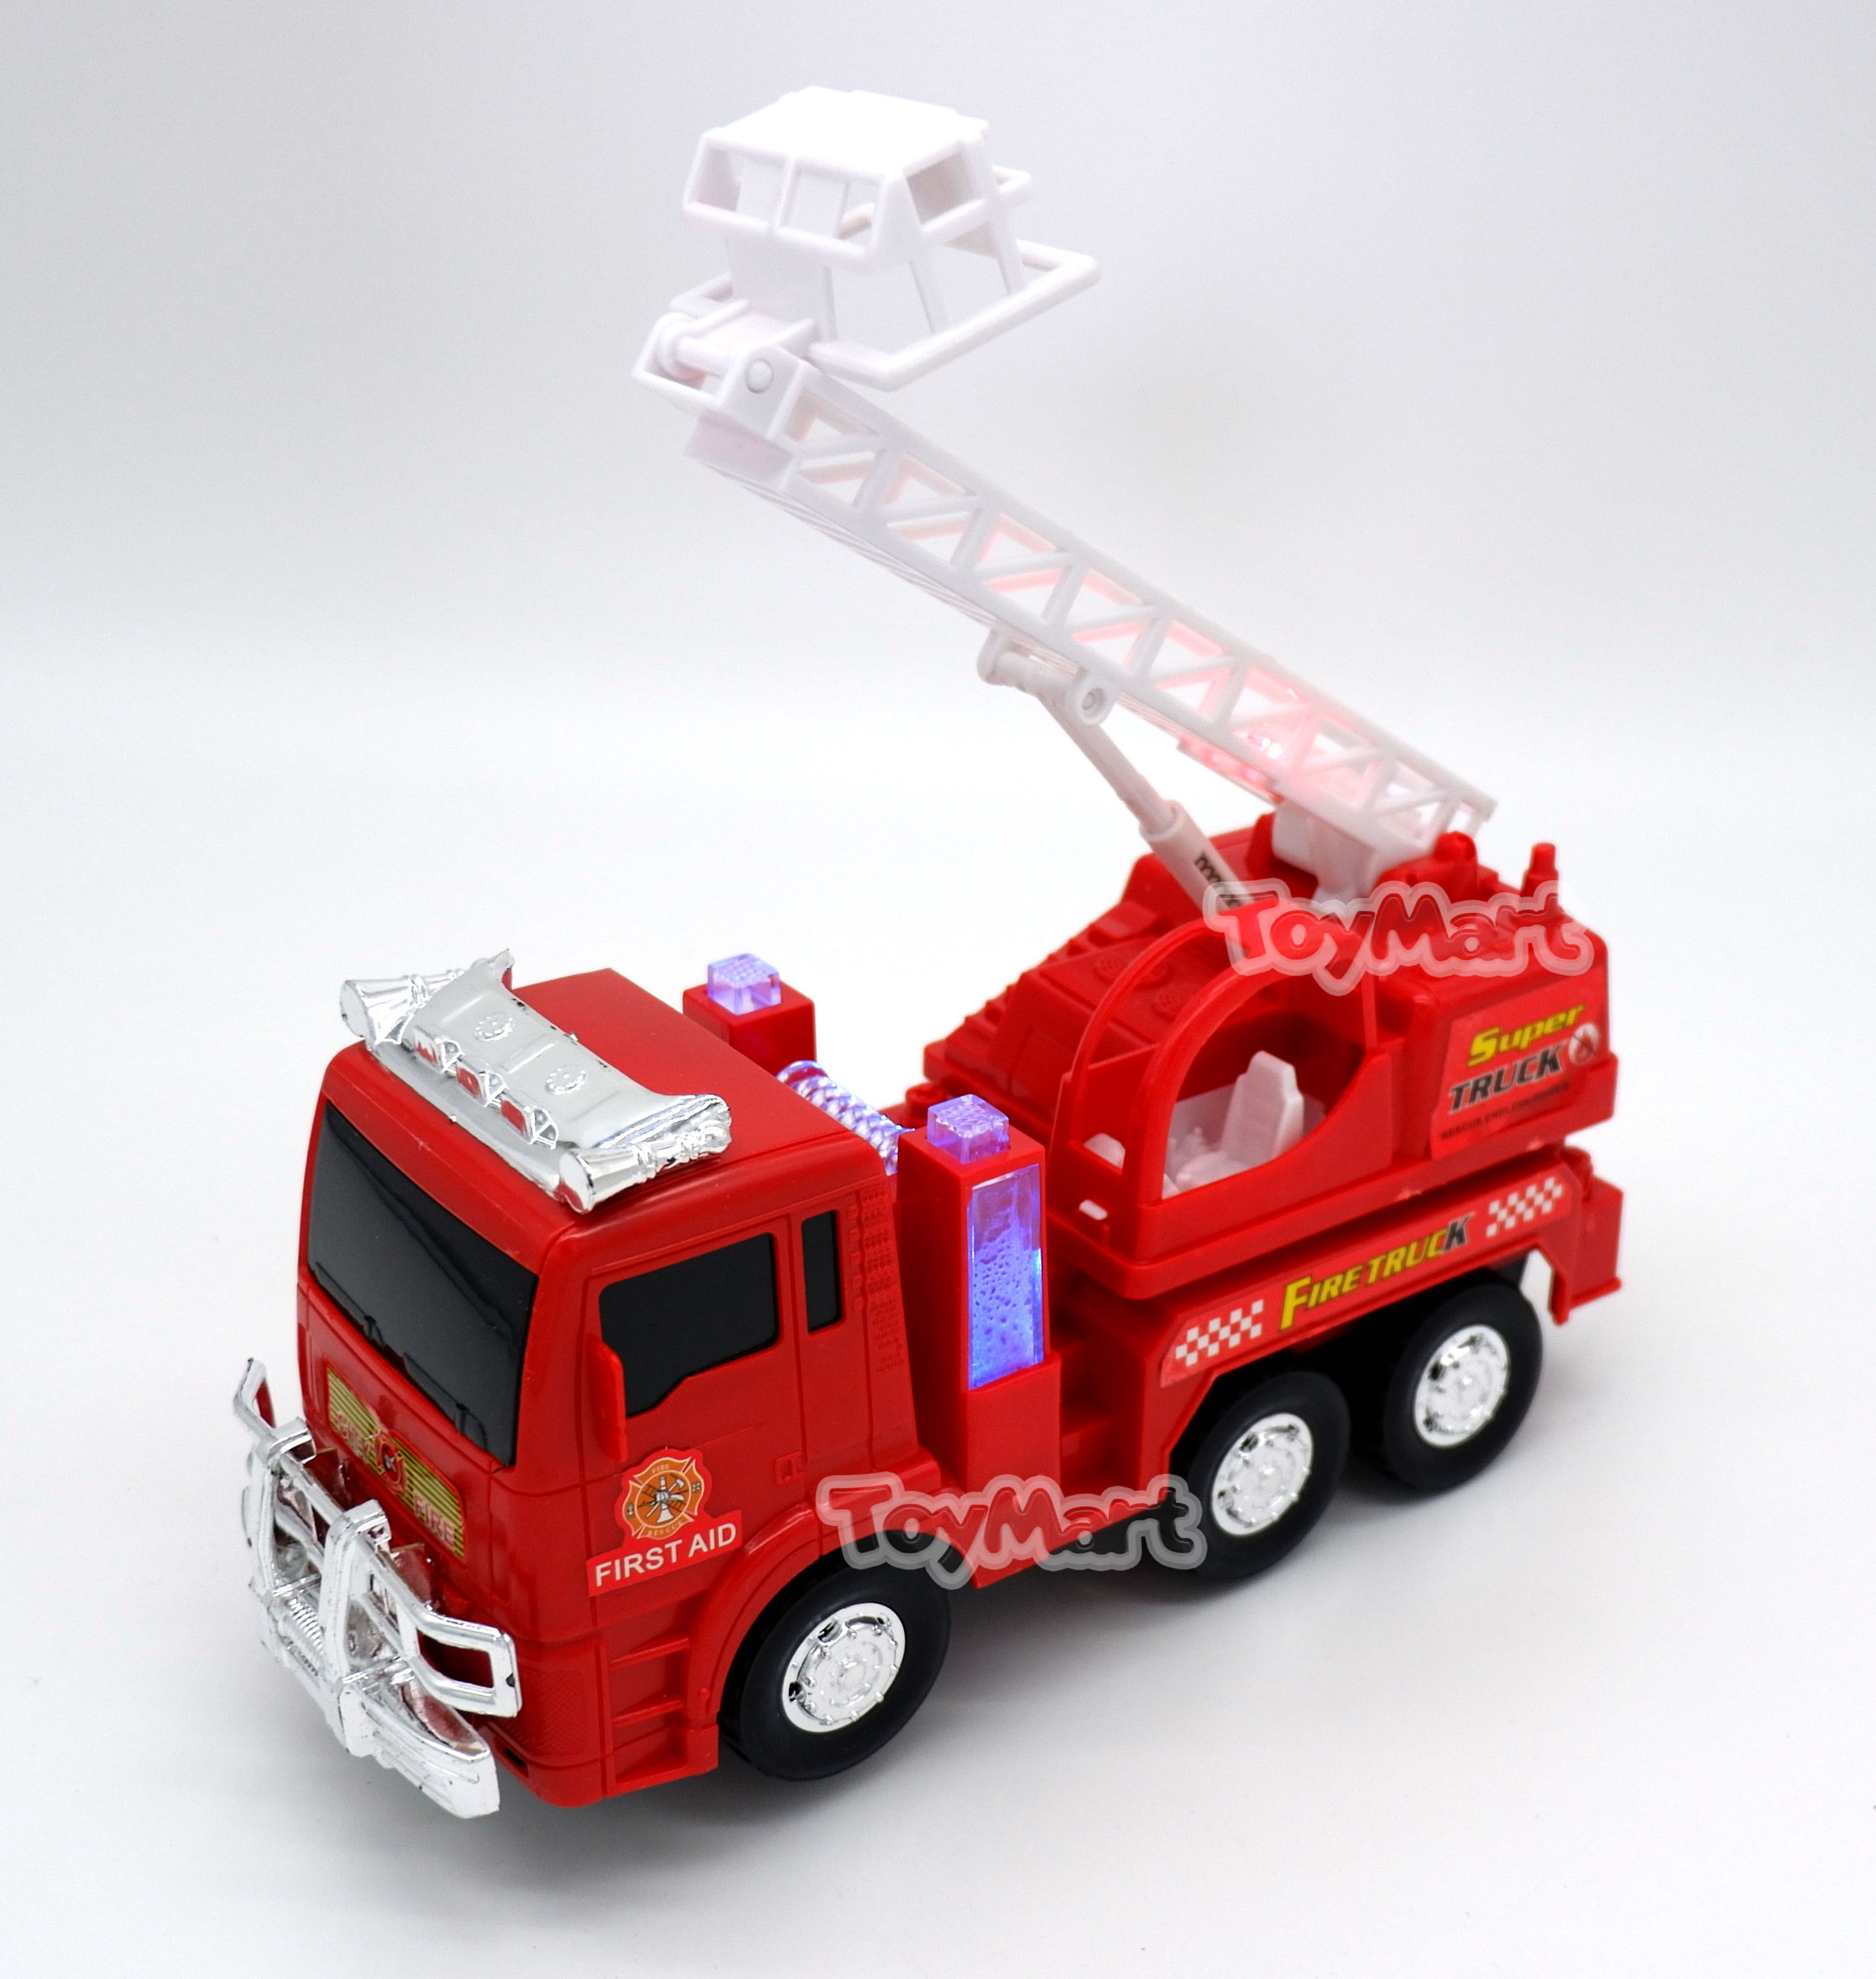 City Fire Truck With Ladder BPA & Phthalates Free vehicle for indoor and outdoor play Includes firefighter figure From KsmToys By LenaCity Fire Truck With Ladder BPA & Phthalates Free vehicle for indoor and outdoor play Includes firefighter figure From Ksm 